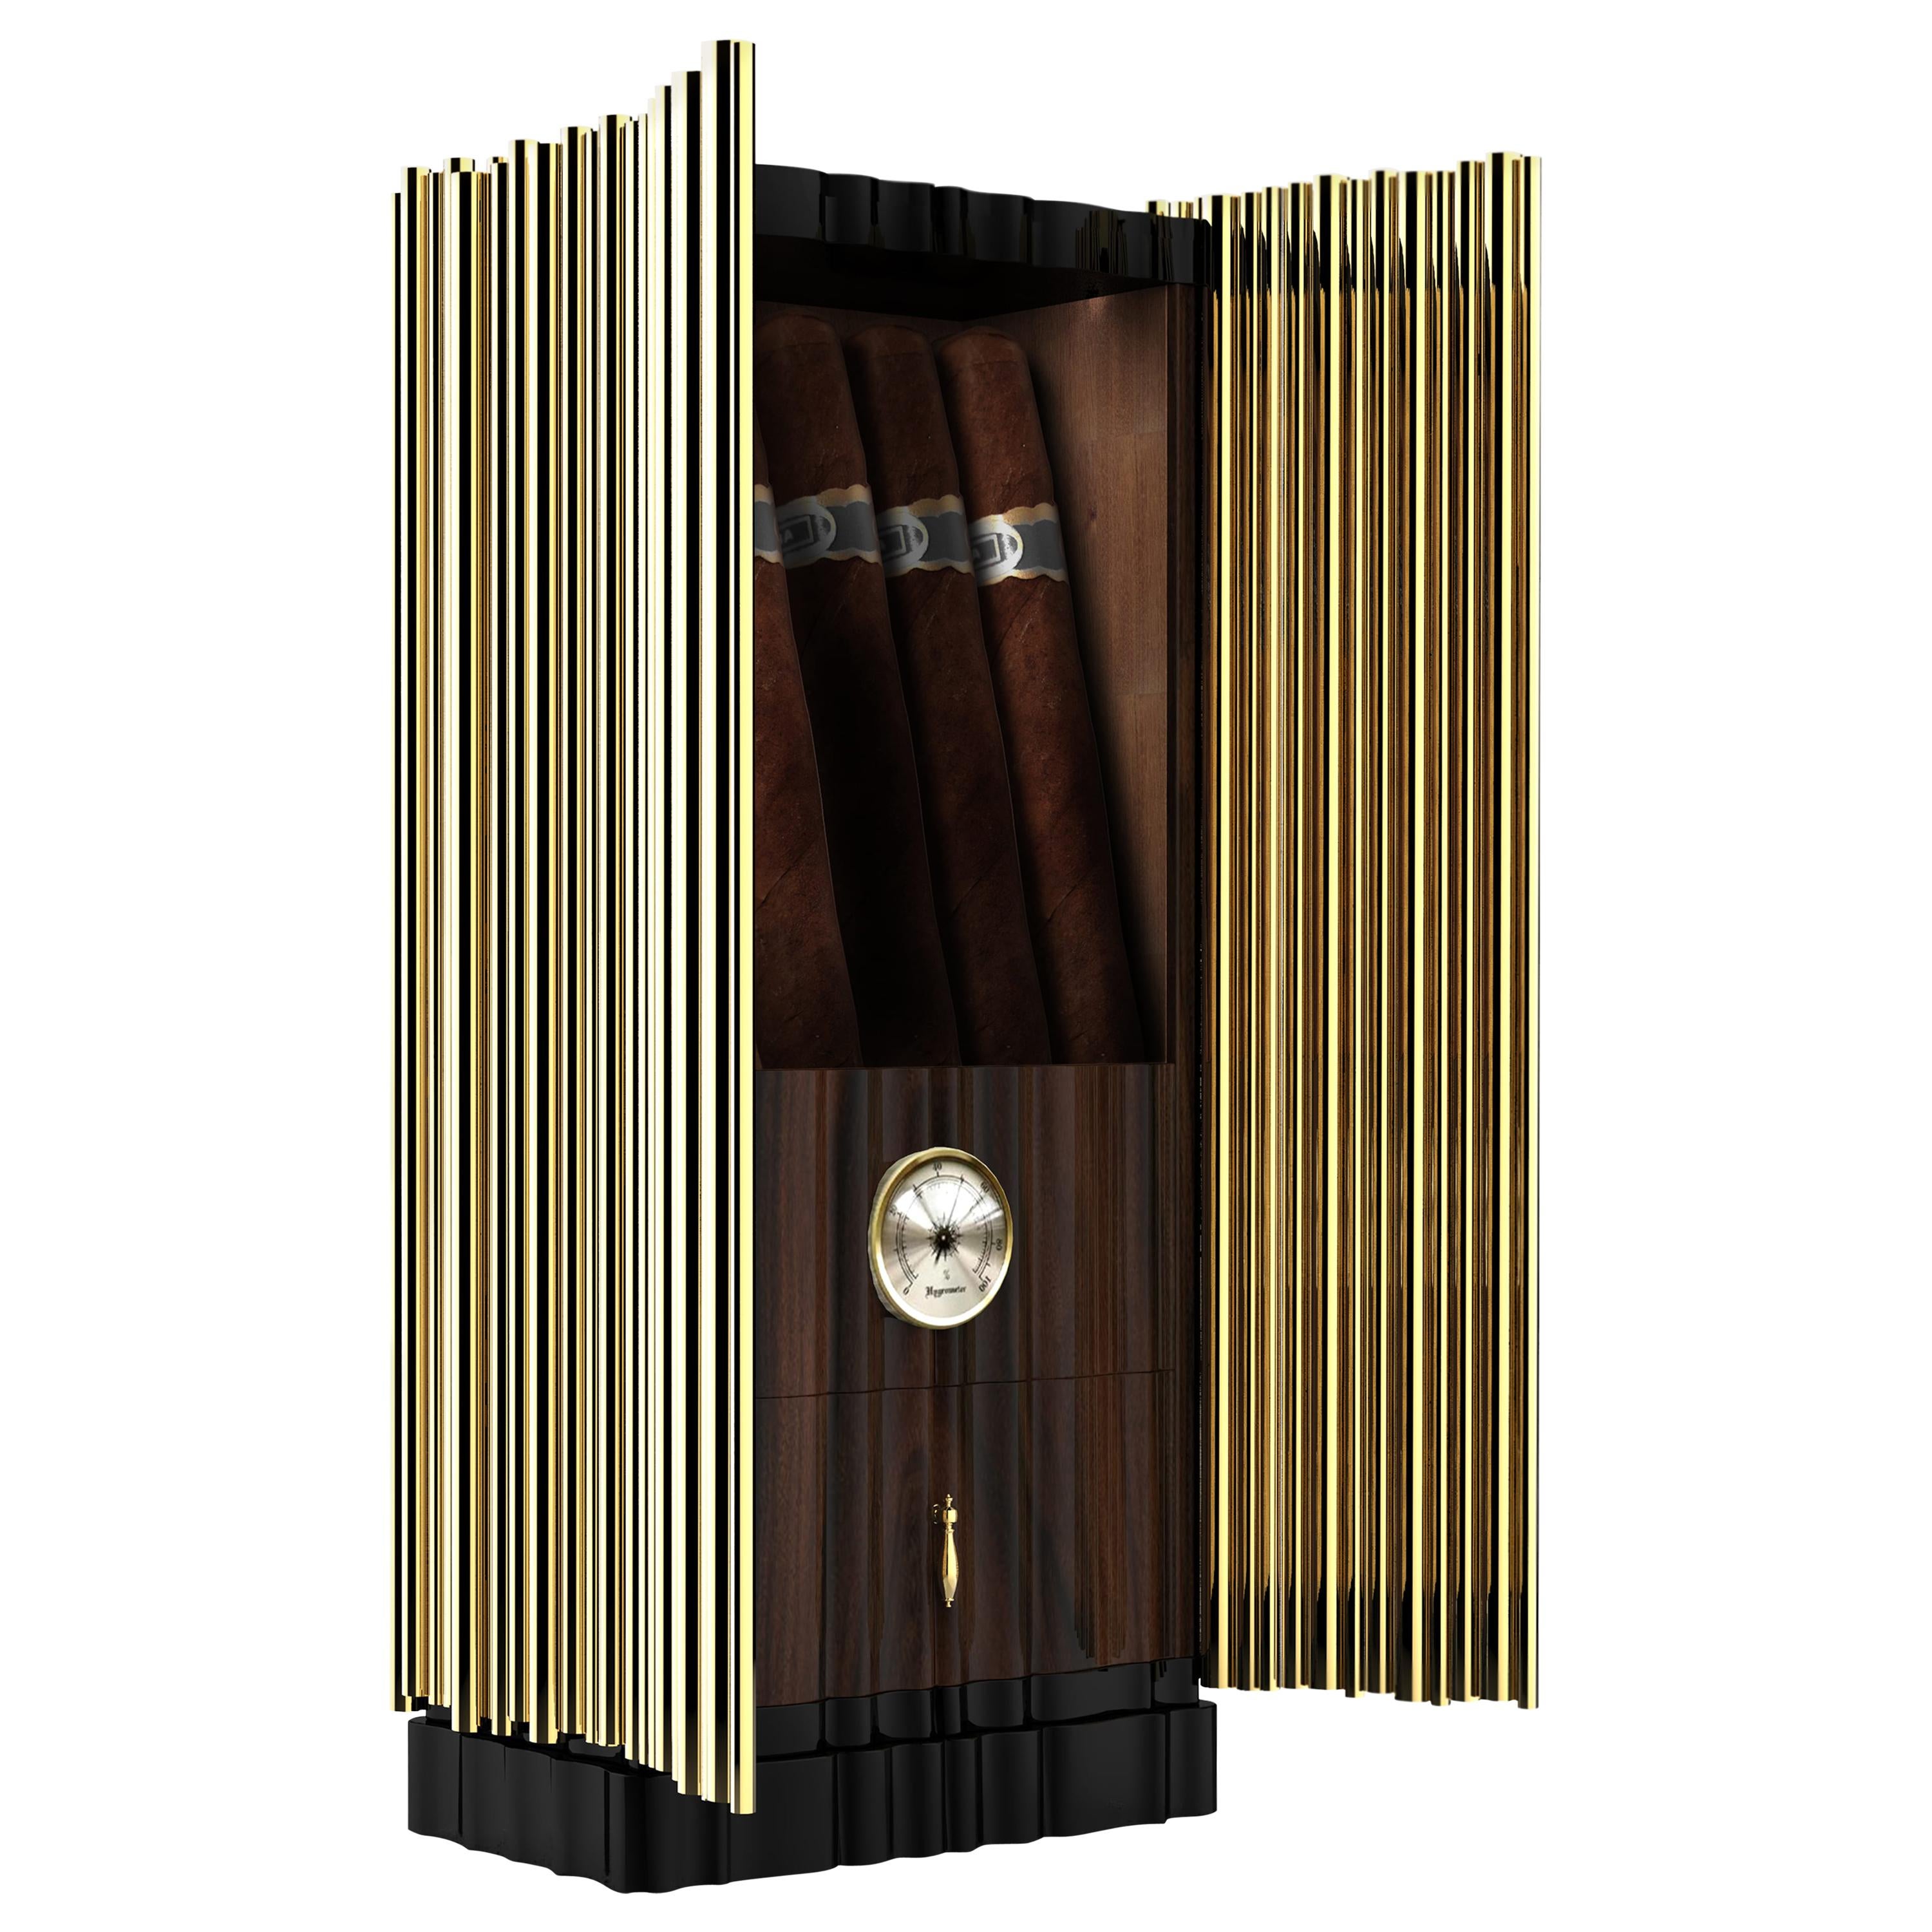 Symphony Cigar Humidor with Gold Plated Brass Detail im Angebot